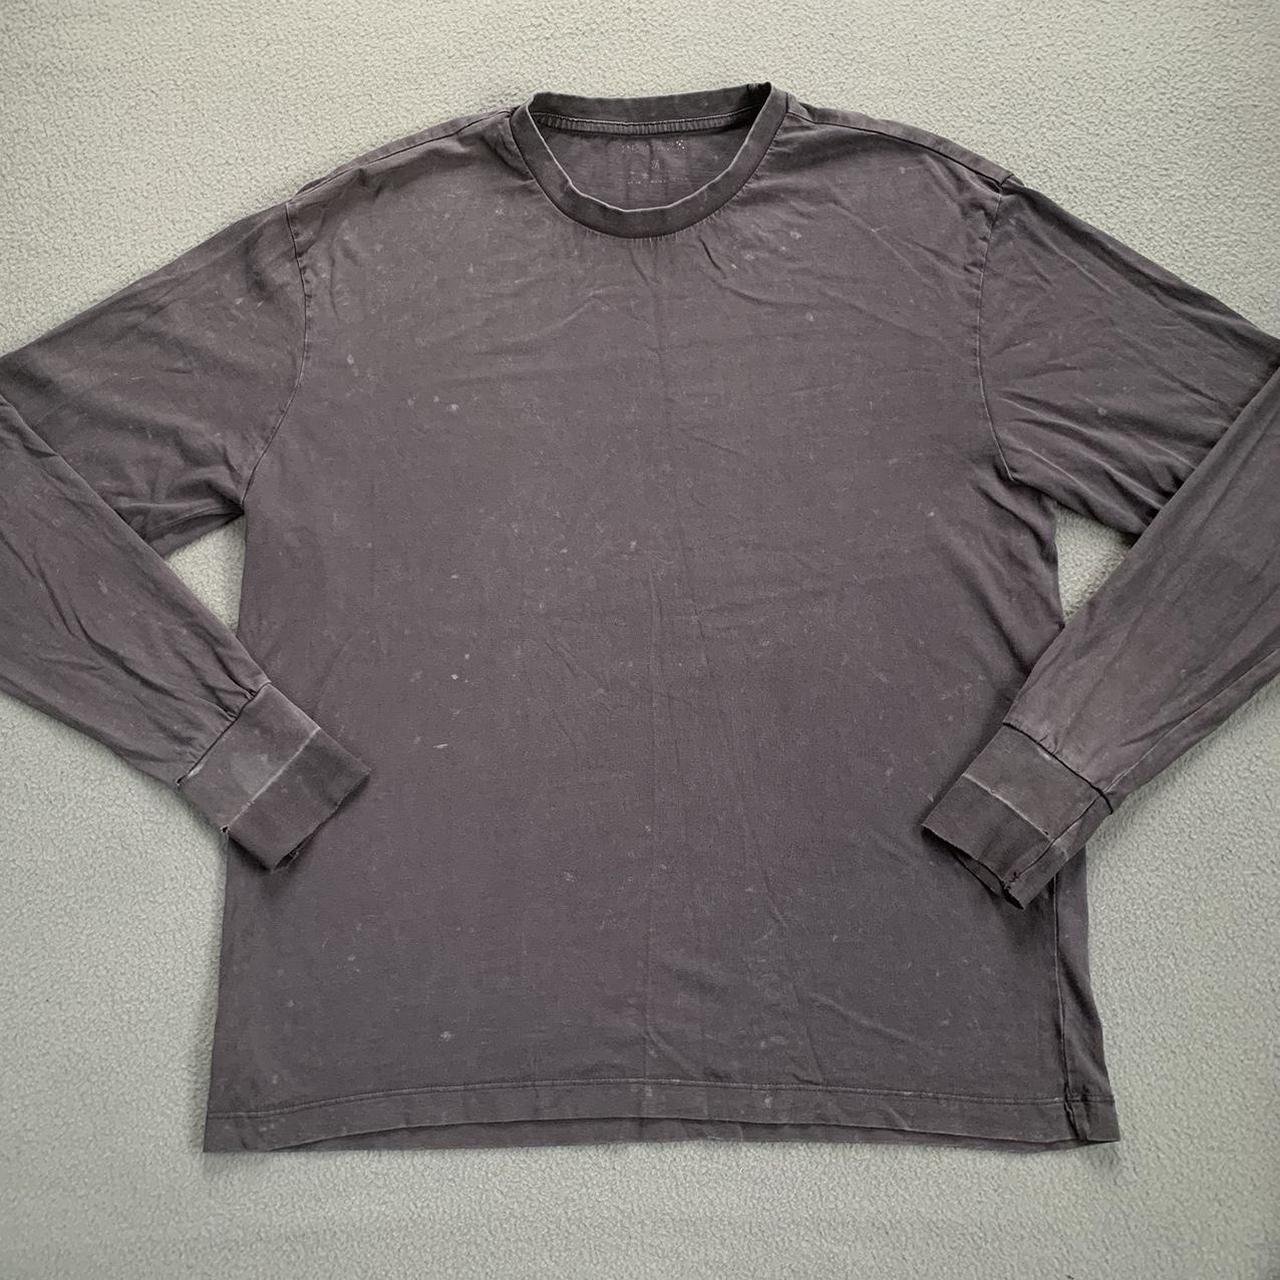 Vintage distressed long sleeve t shirt in a faded... - Depop